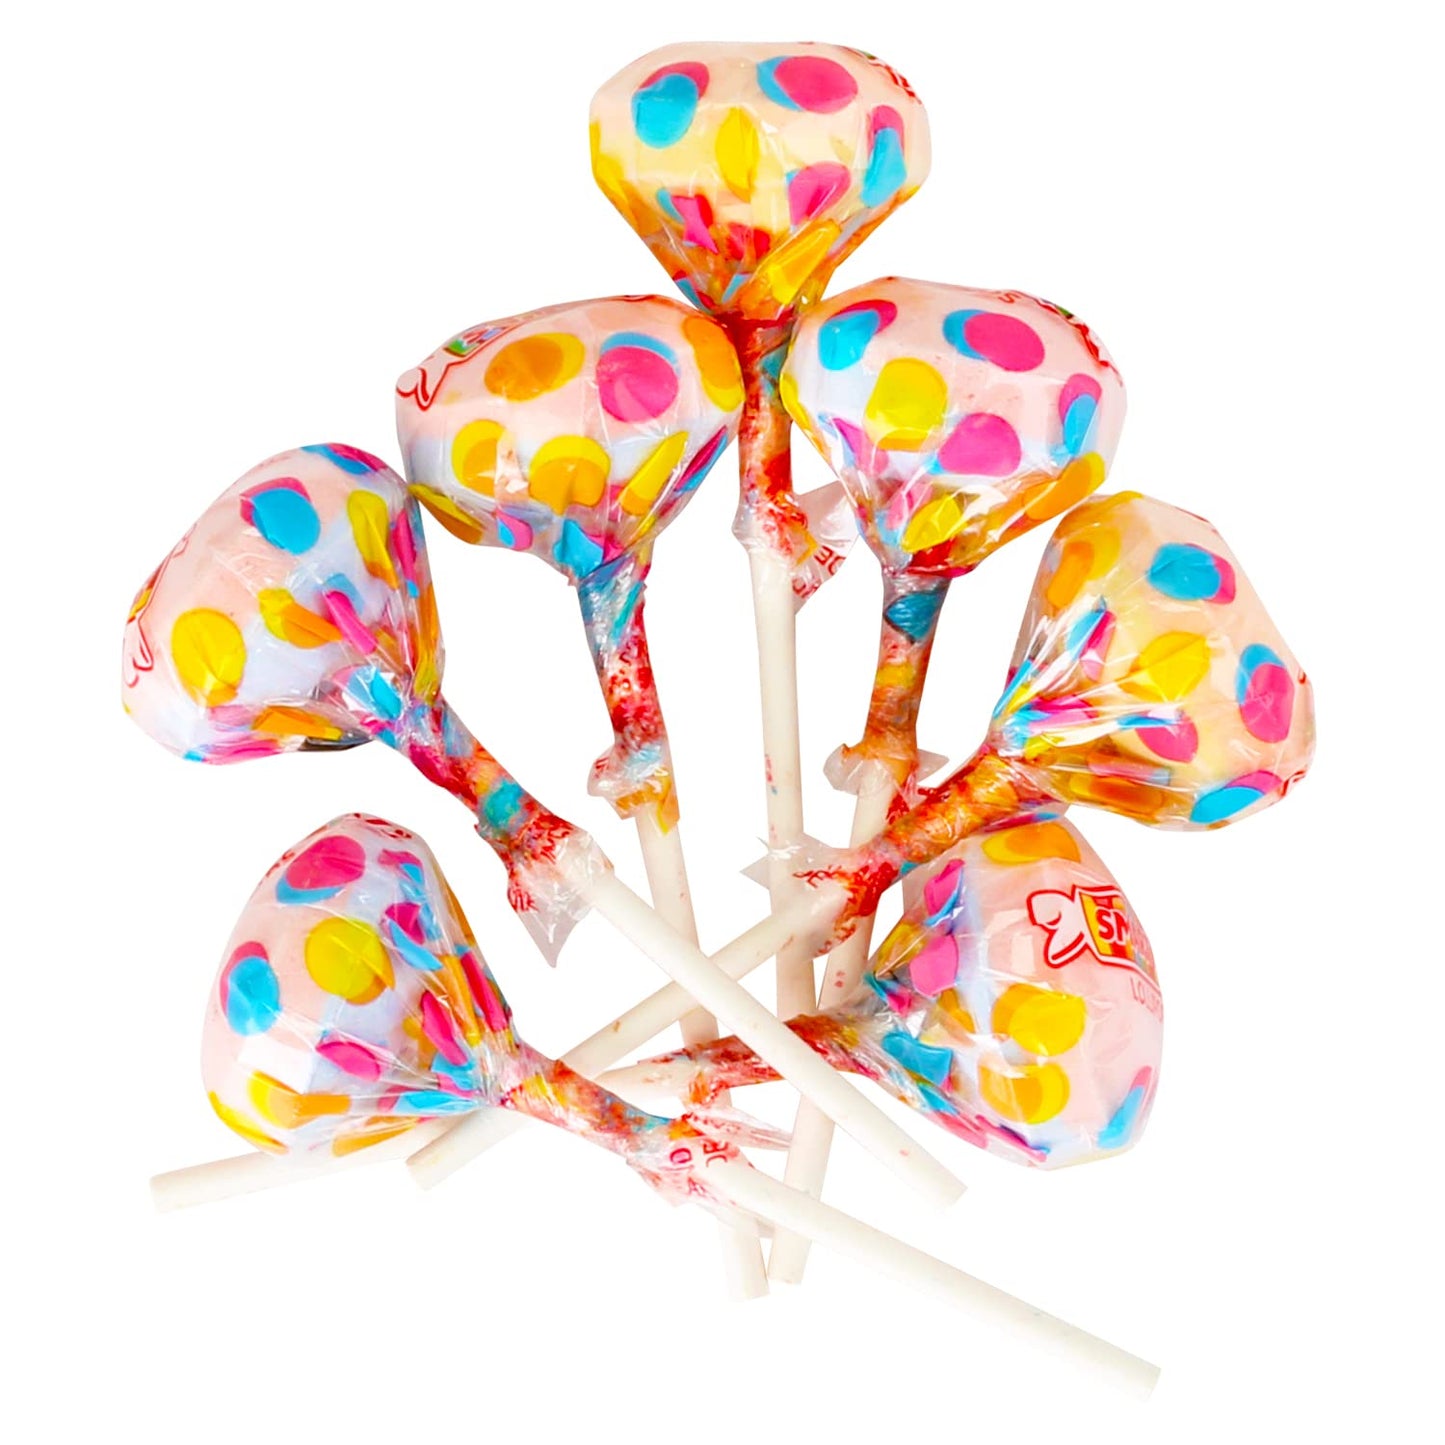 Smarties Lollipops - Double Lollies - Roughly 150 Ct Bulk Individually Wrapped 3LB Party Bag Family Size - Fun Candy for Kids